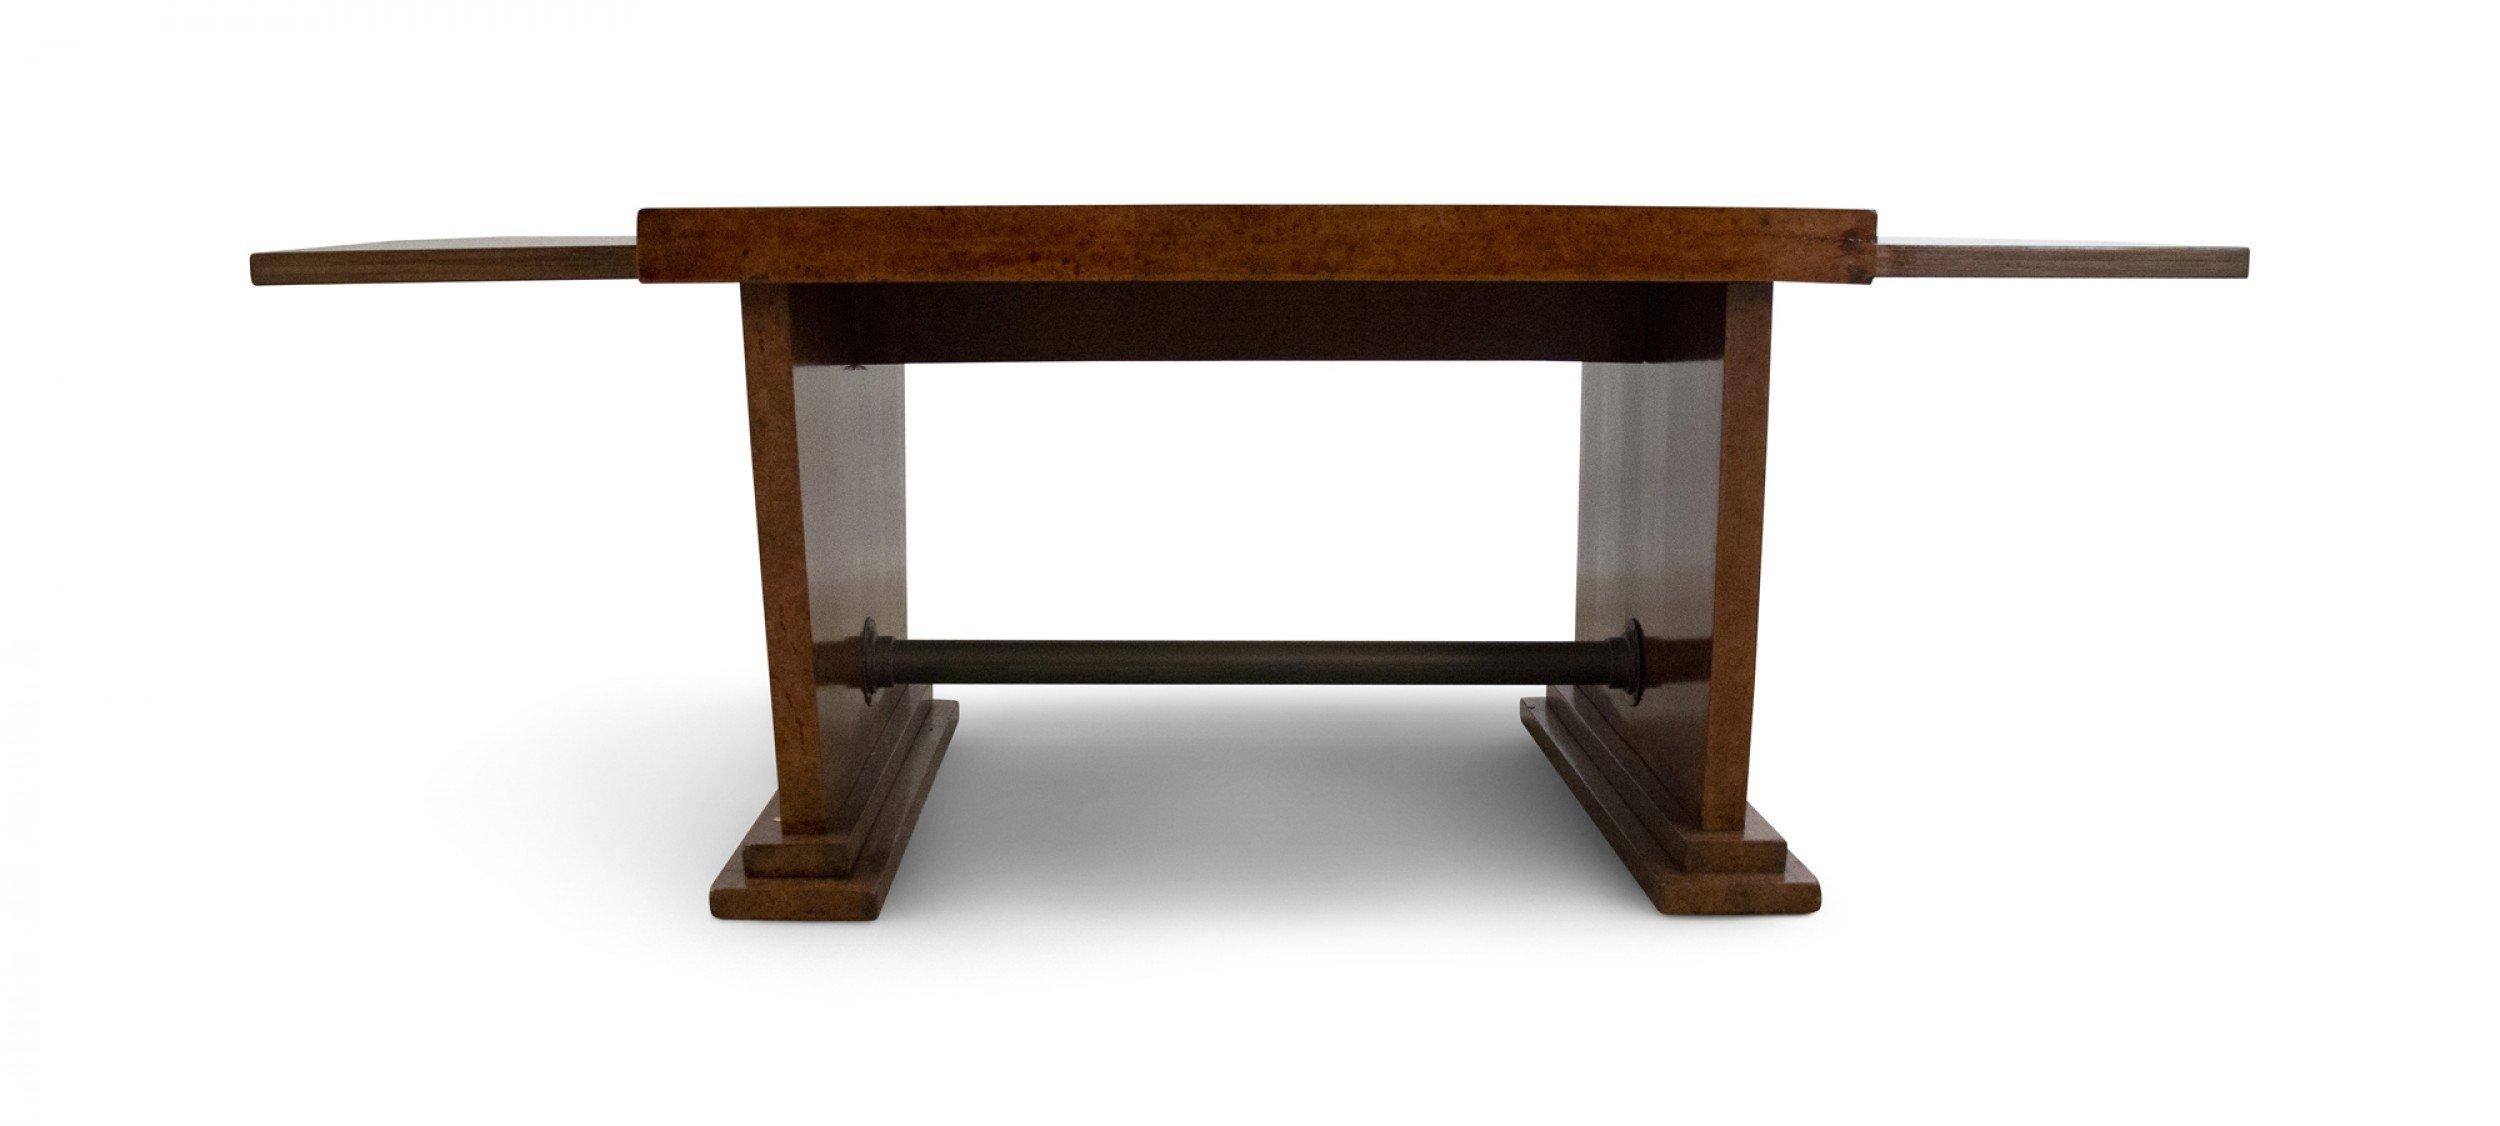 American Art Deco style burl wood coffee table with a raised center section and two slightly lower sides and a patinated bronze stretcher.
    